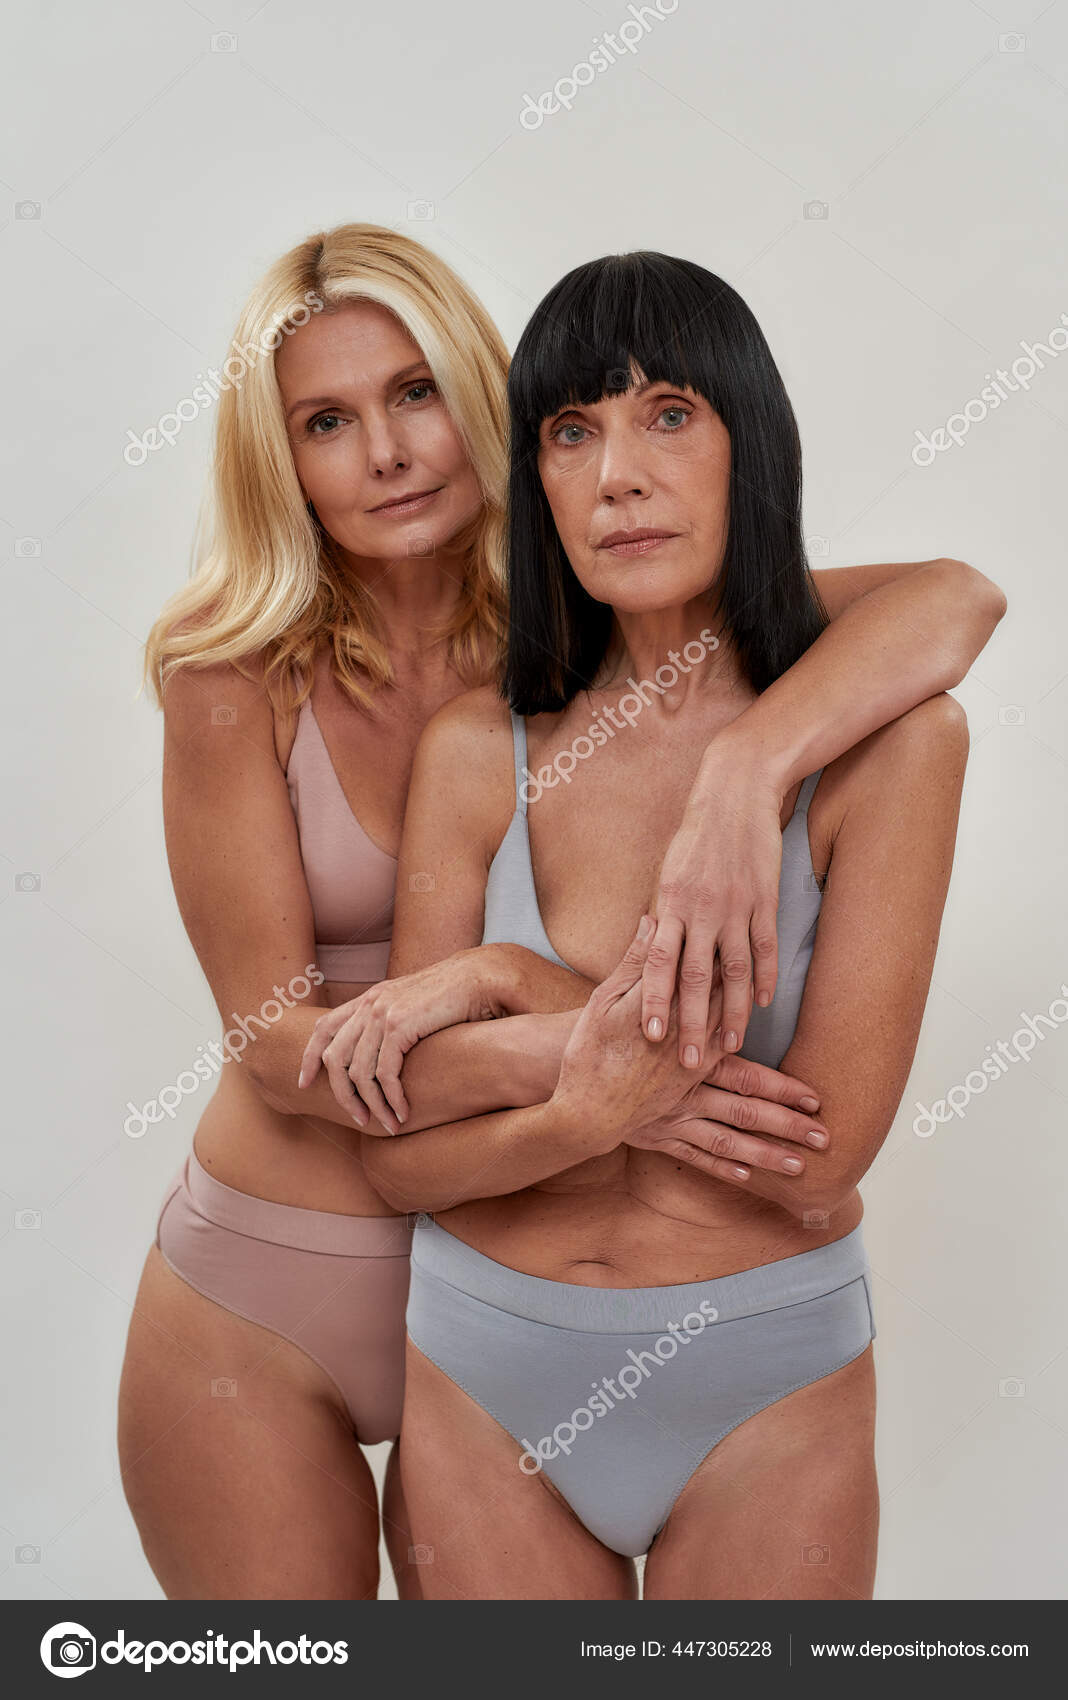 Two beautiful women in underwear looking at camera holding hands, embracing each other while posing together over light background image photo